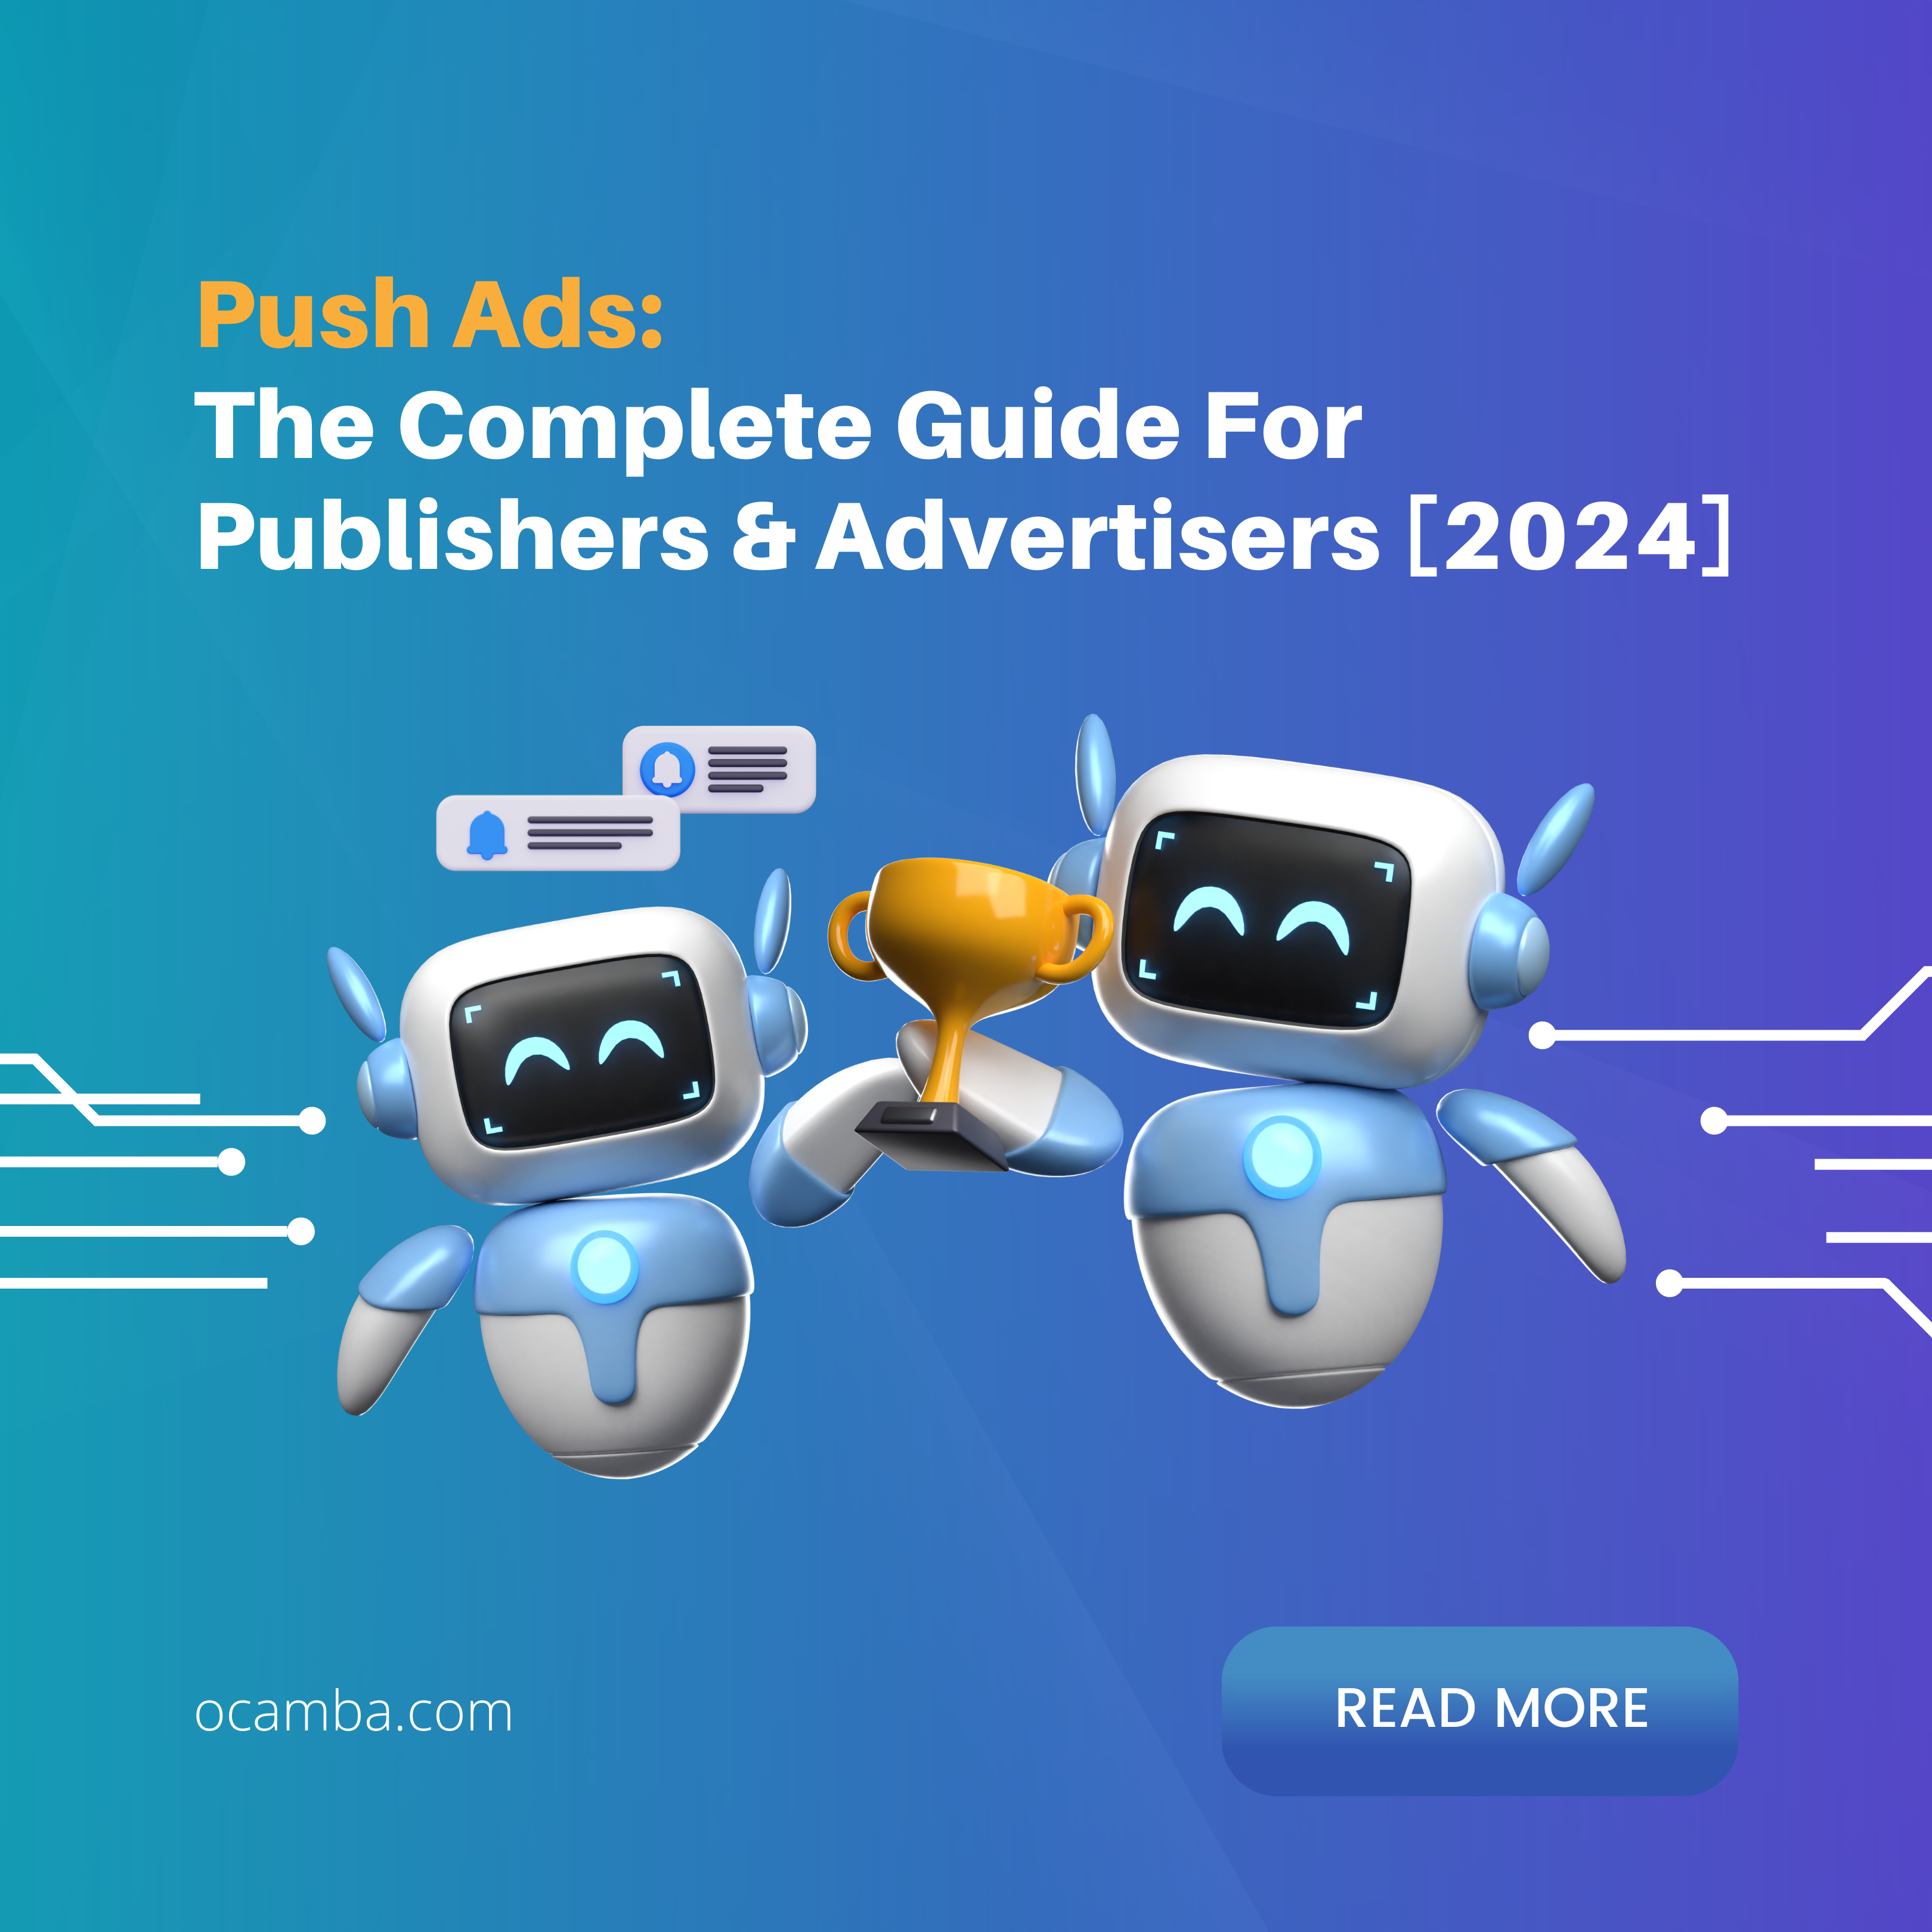  Push Ads: The Complete Guide For Publishers & Advertisers [2024] 